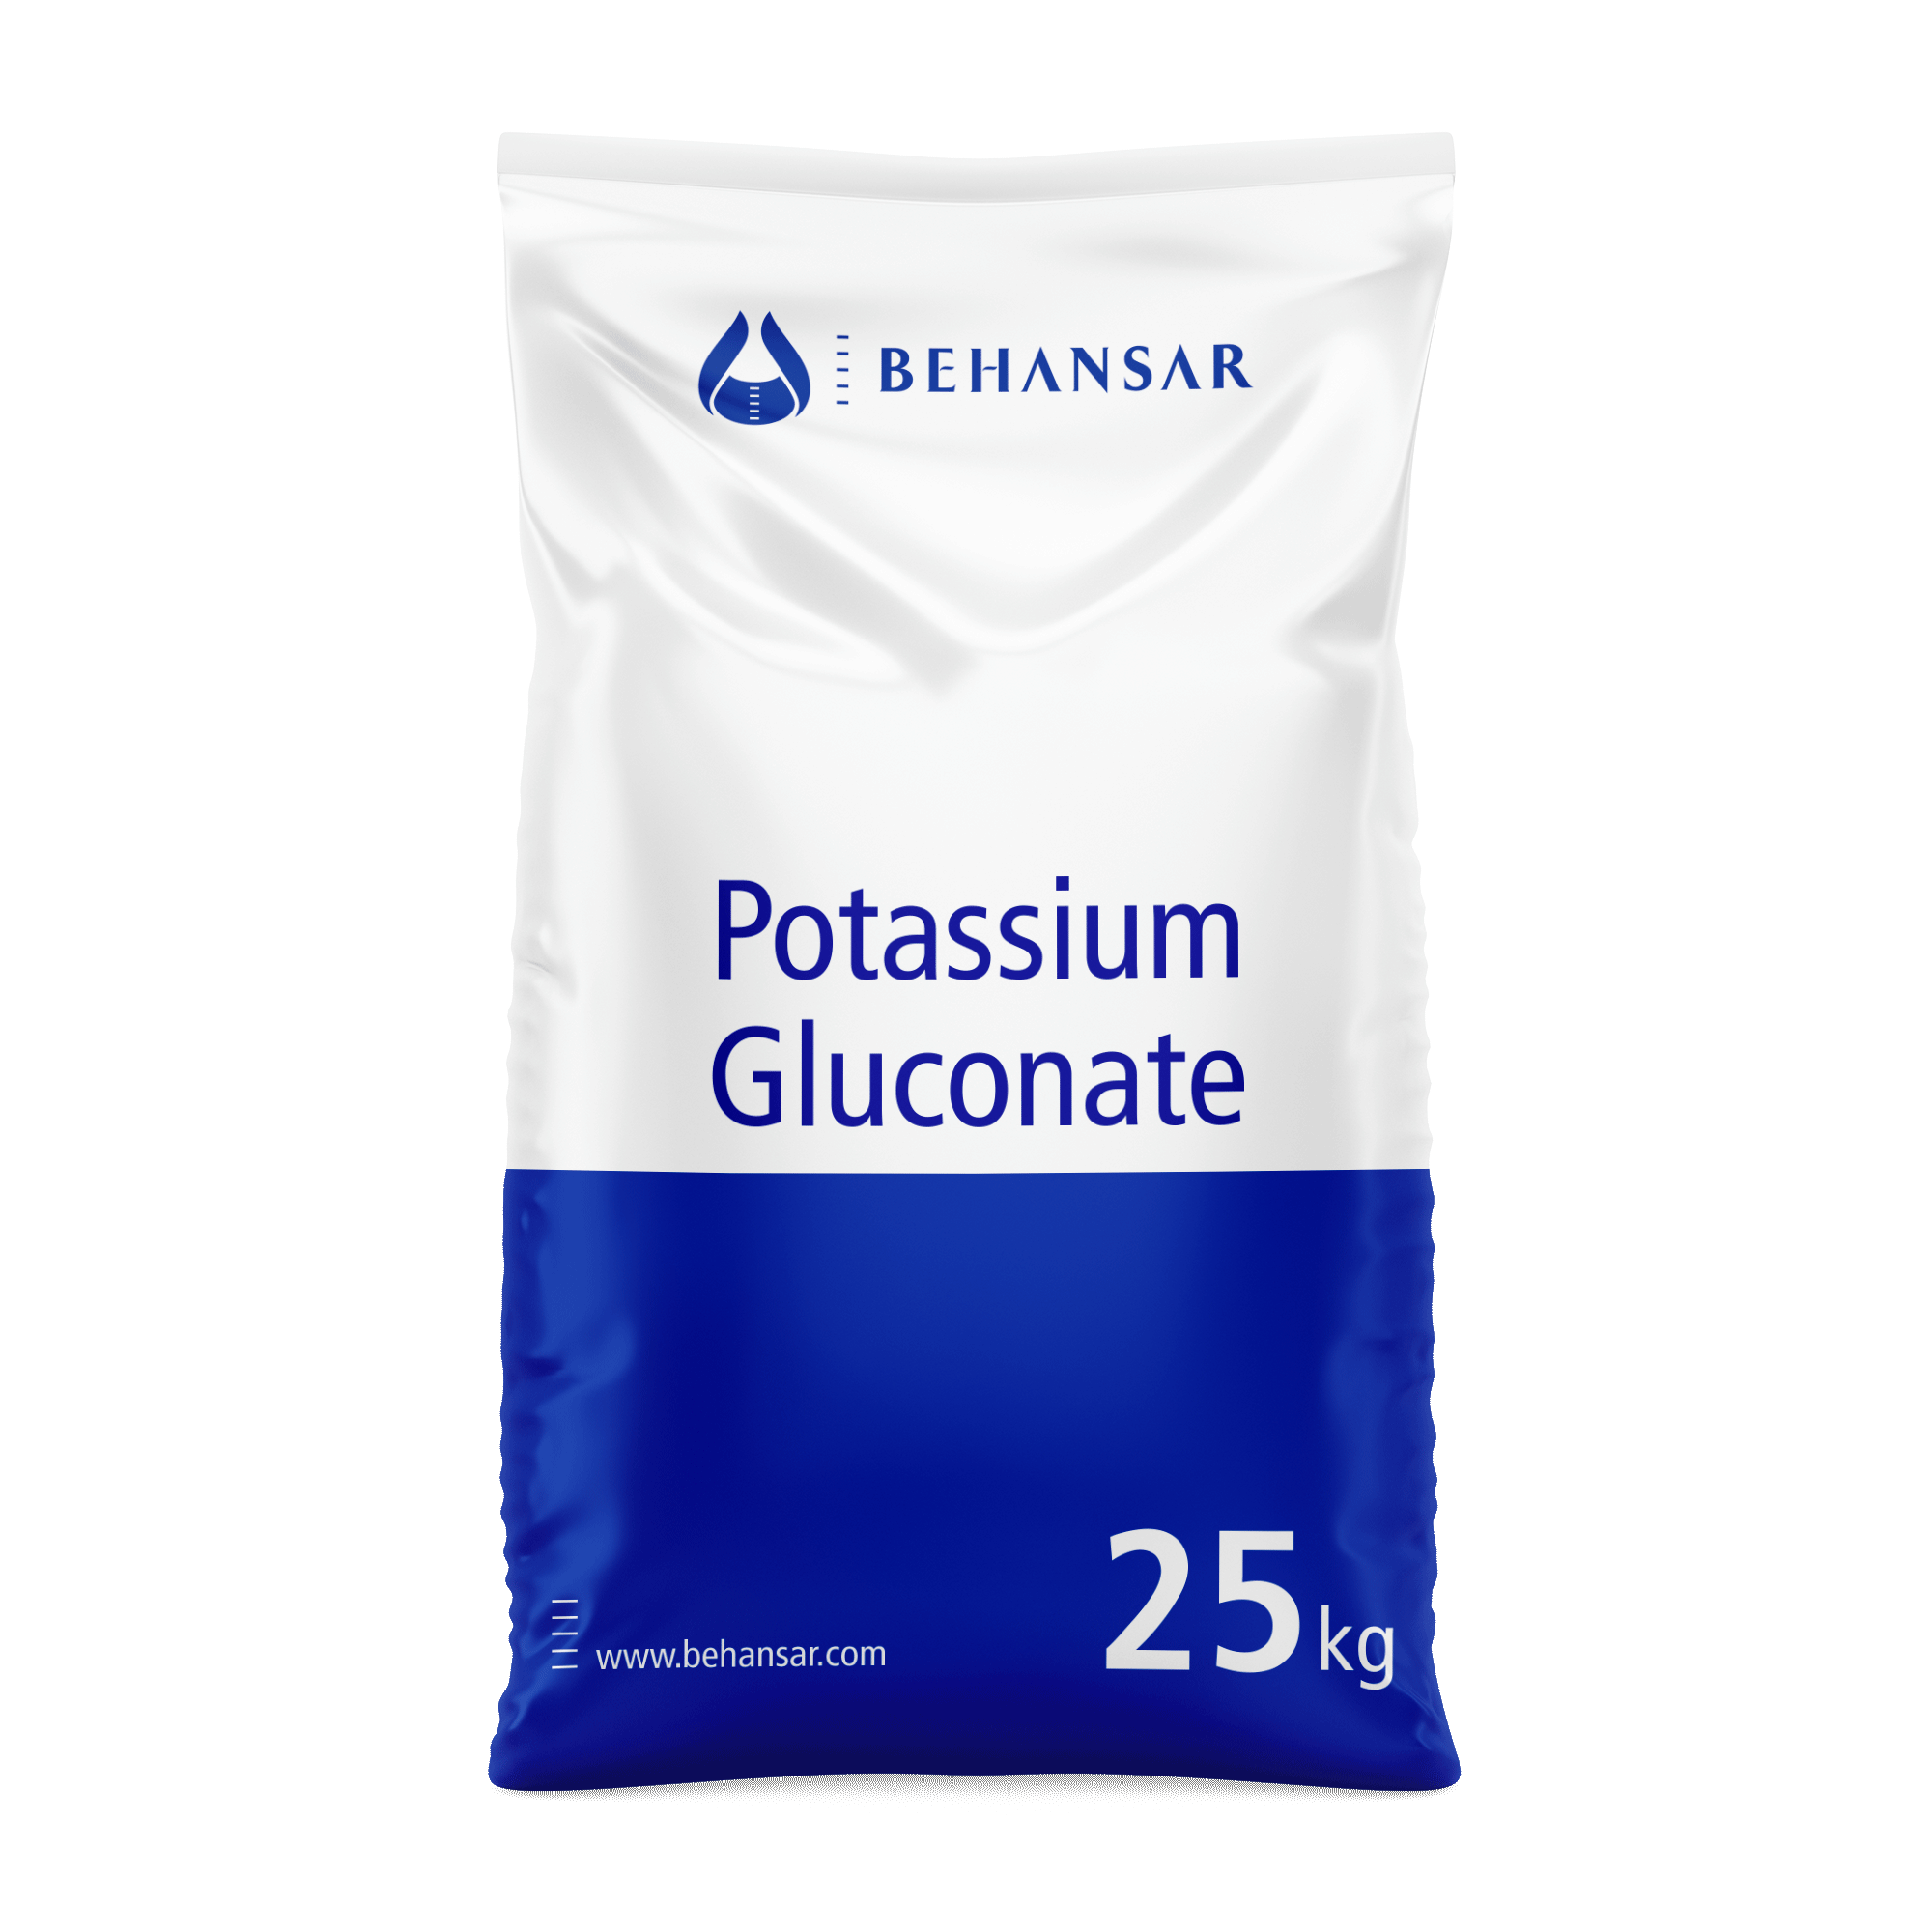 Potassium Gluconate is one of the products of Behansar Co